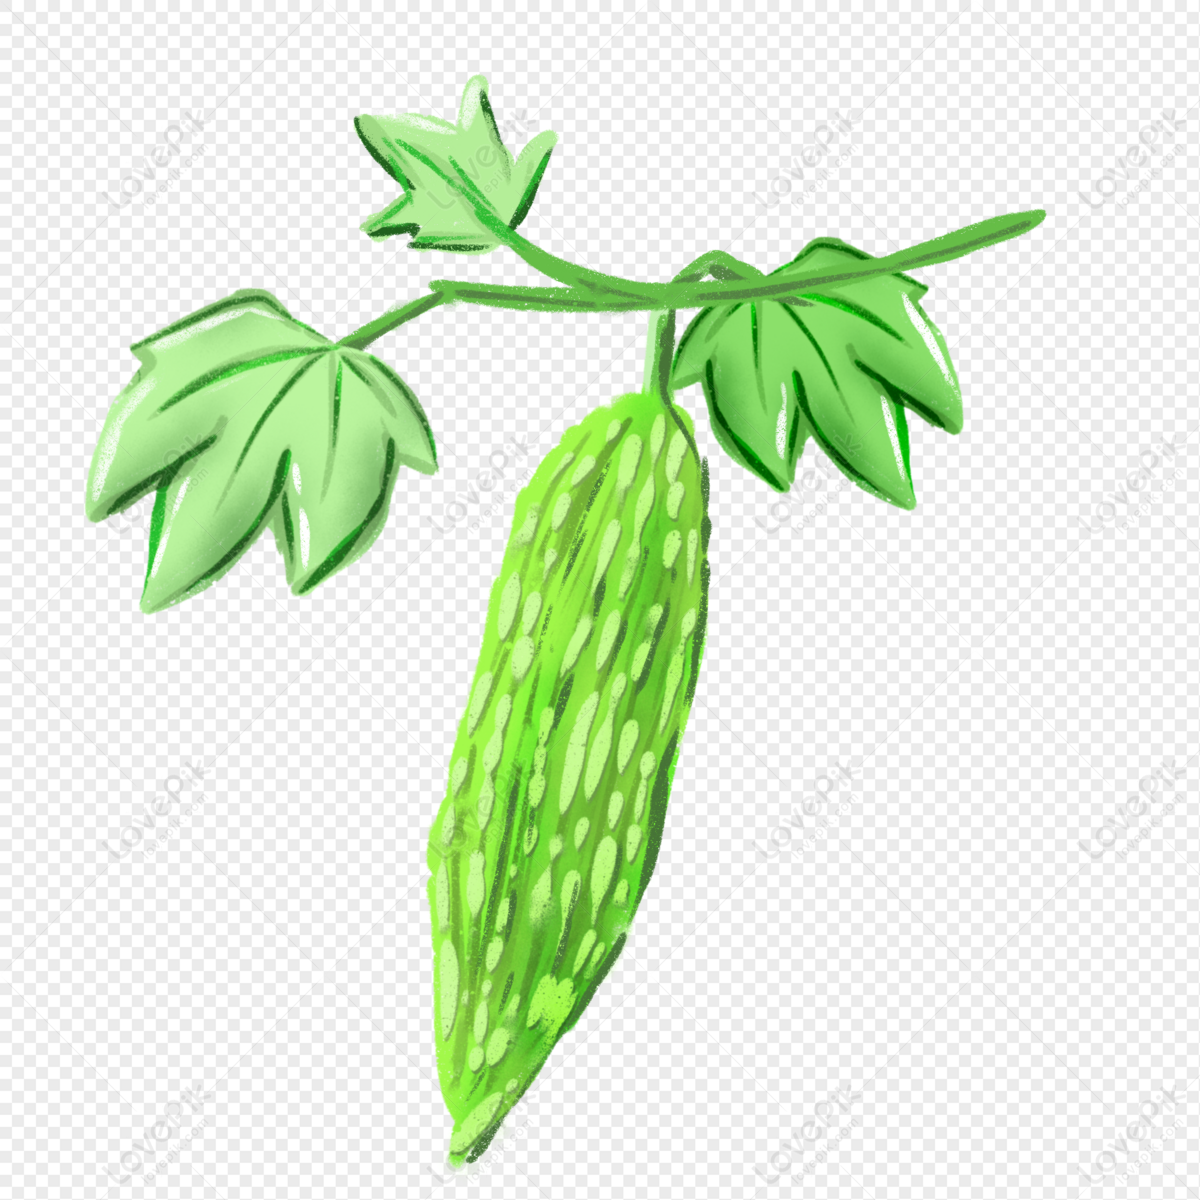 Trending AI Image Generator of bitter gourd images | PromeAI